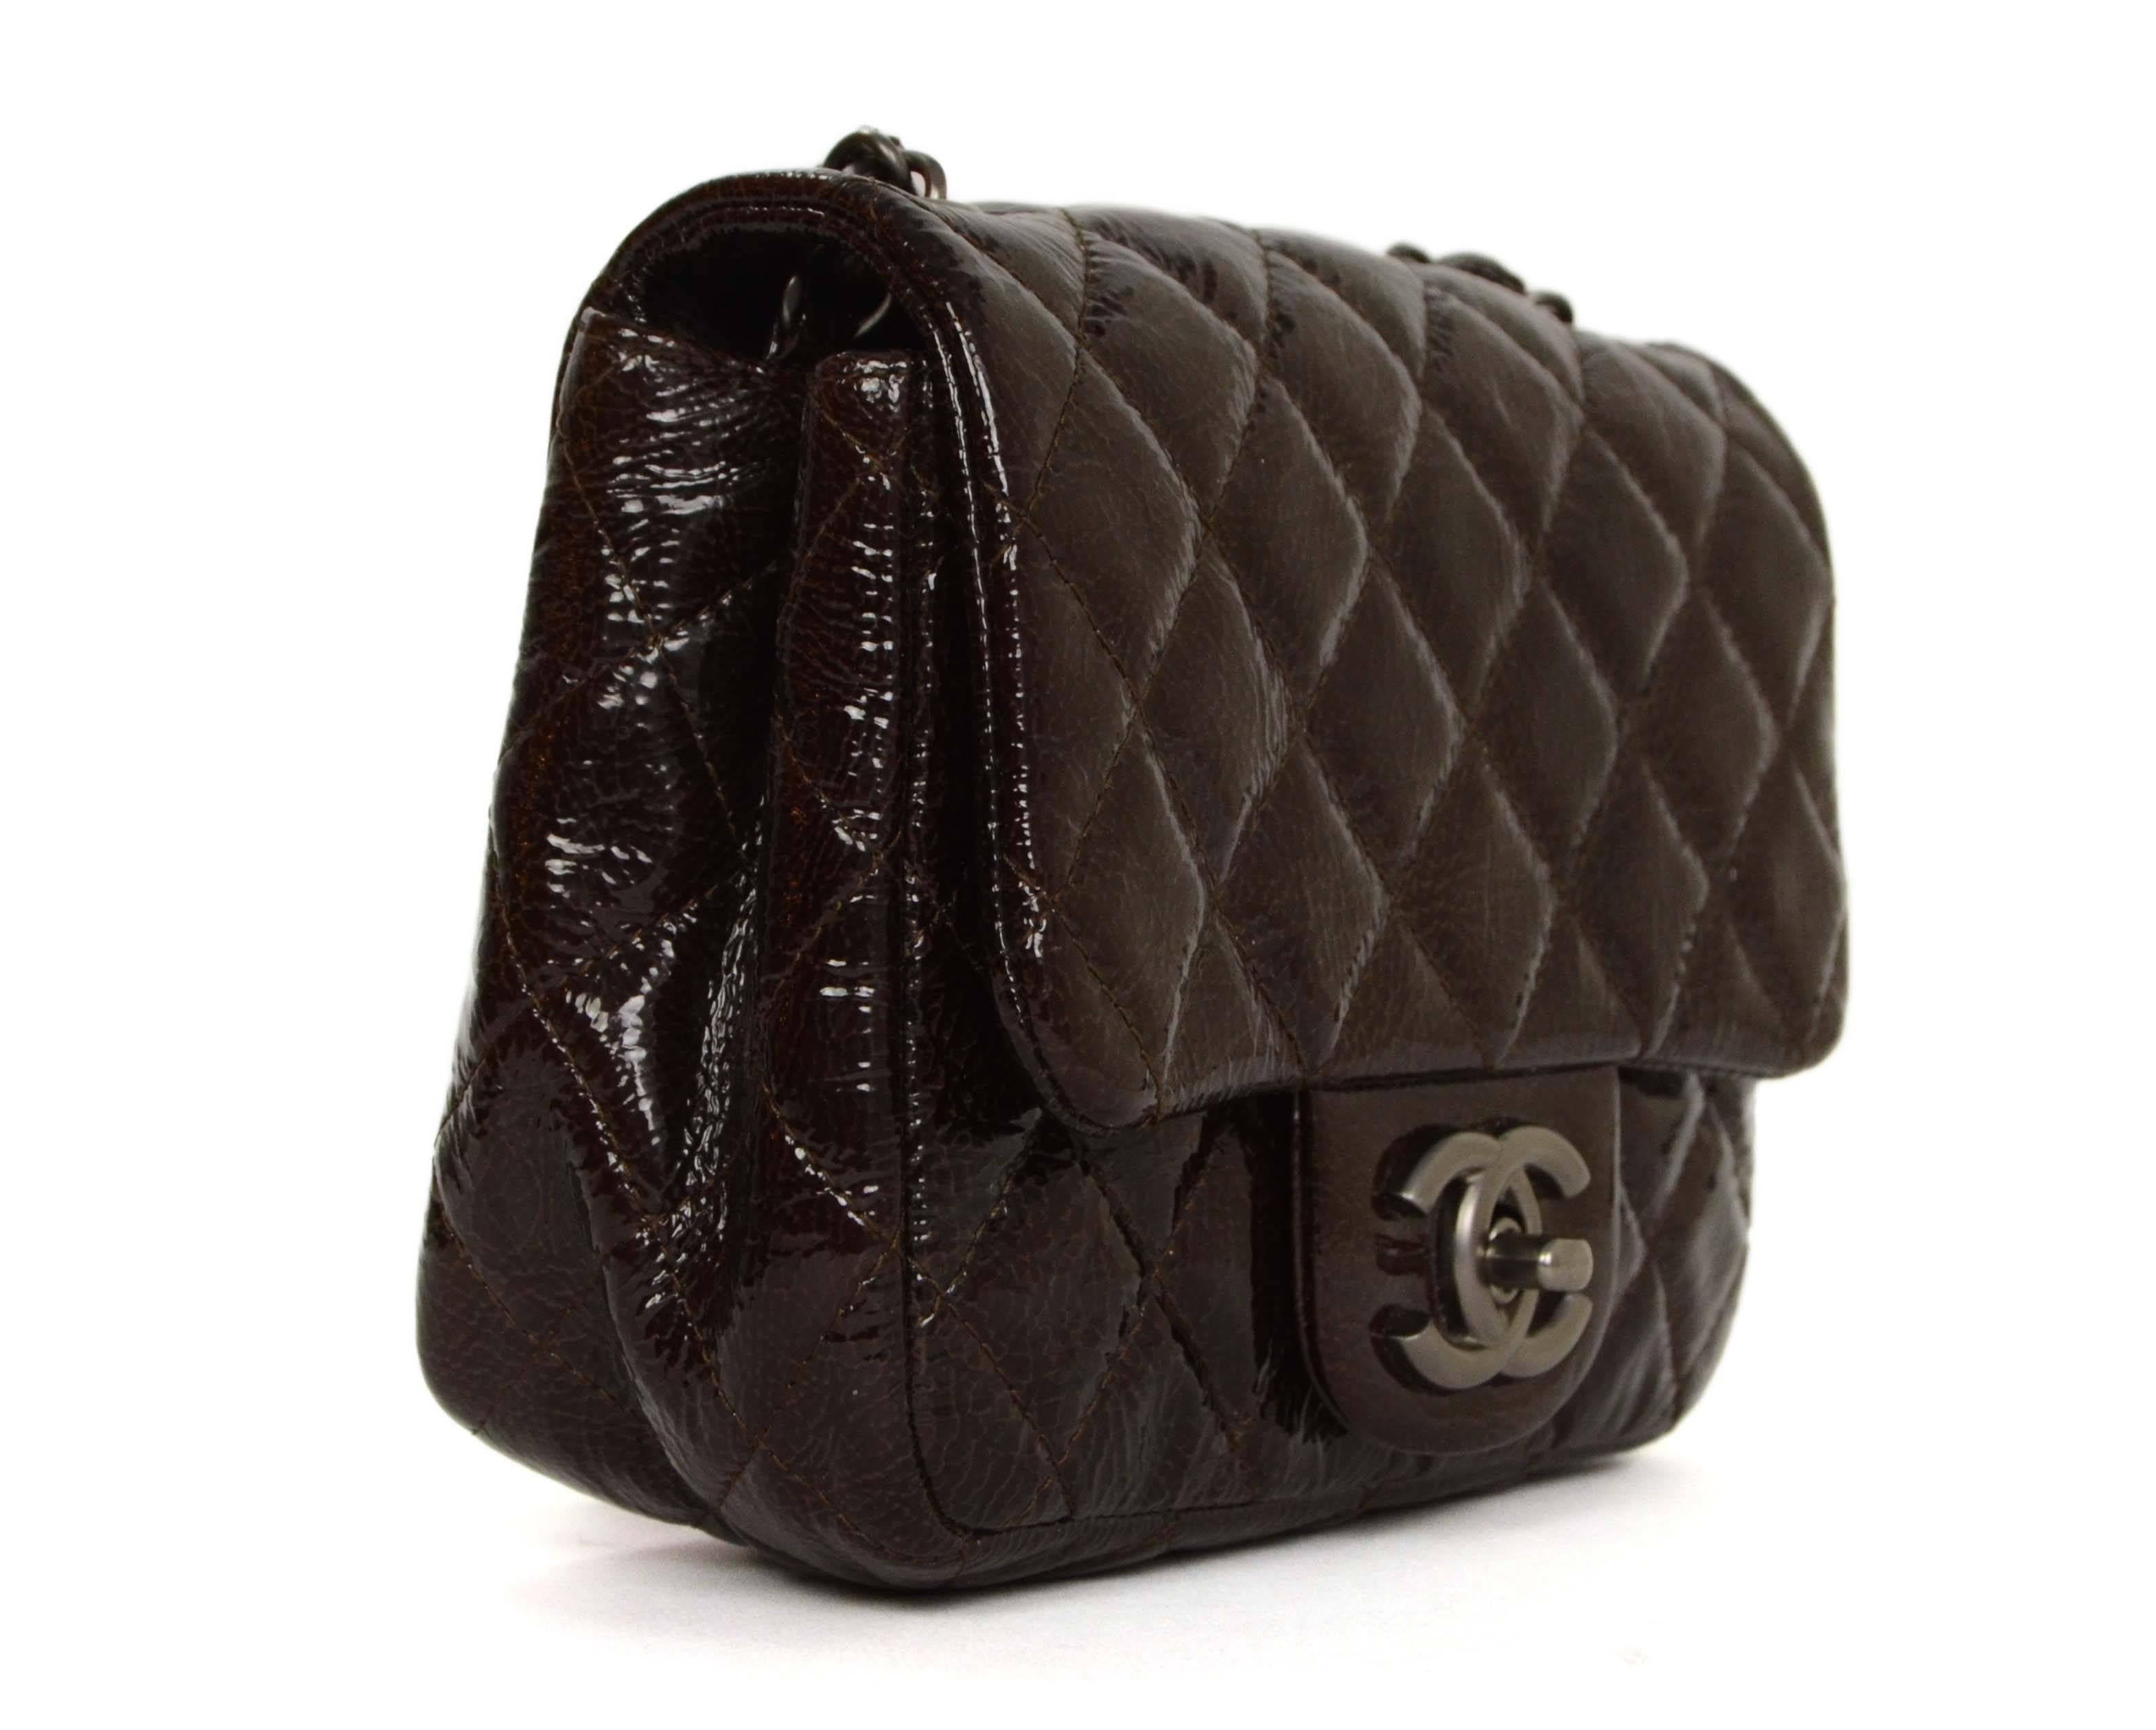 Chanel Brown Distressed Patent Leather Square Mini Flap Bag SHW

    Made In: France

    Year of Production: 2009

    Color: Brown

    Hardware: Silver

    Materials: Distressed patent leather, metal

    Lining: Brown lambskin